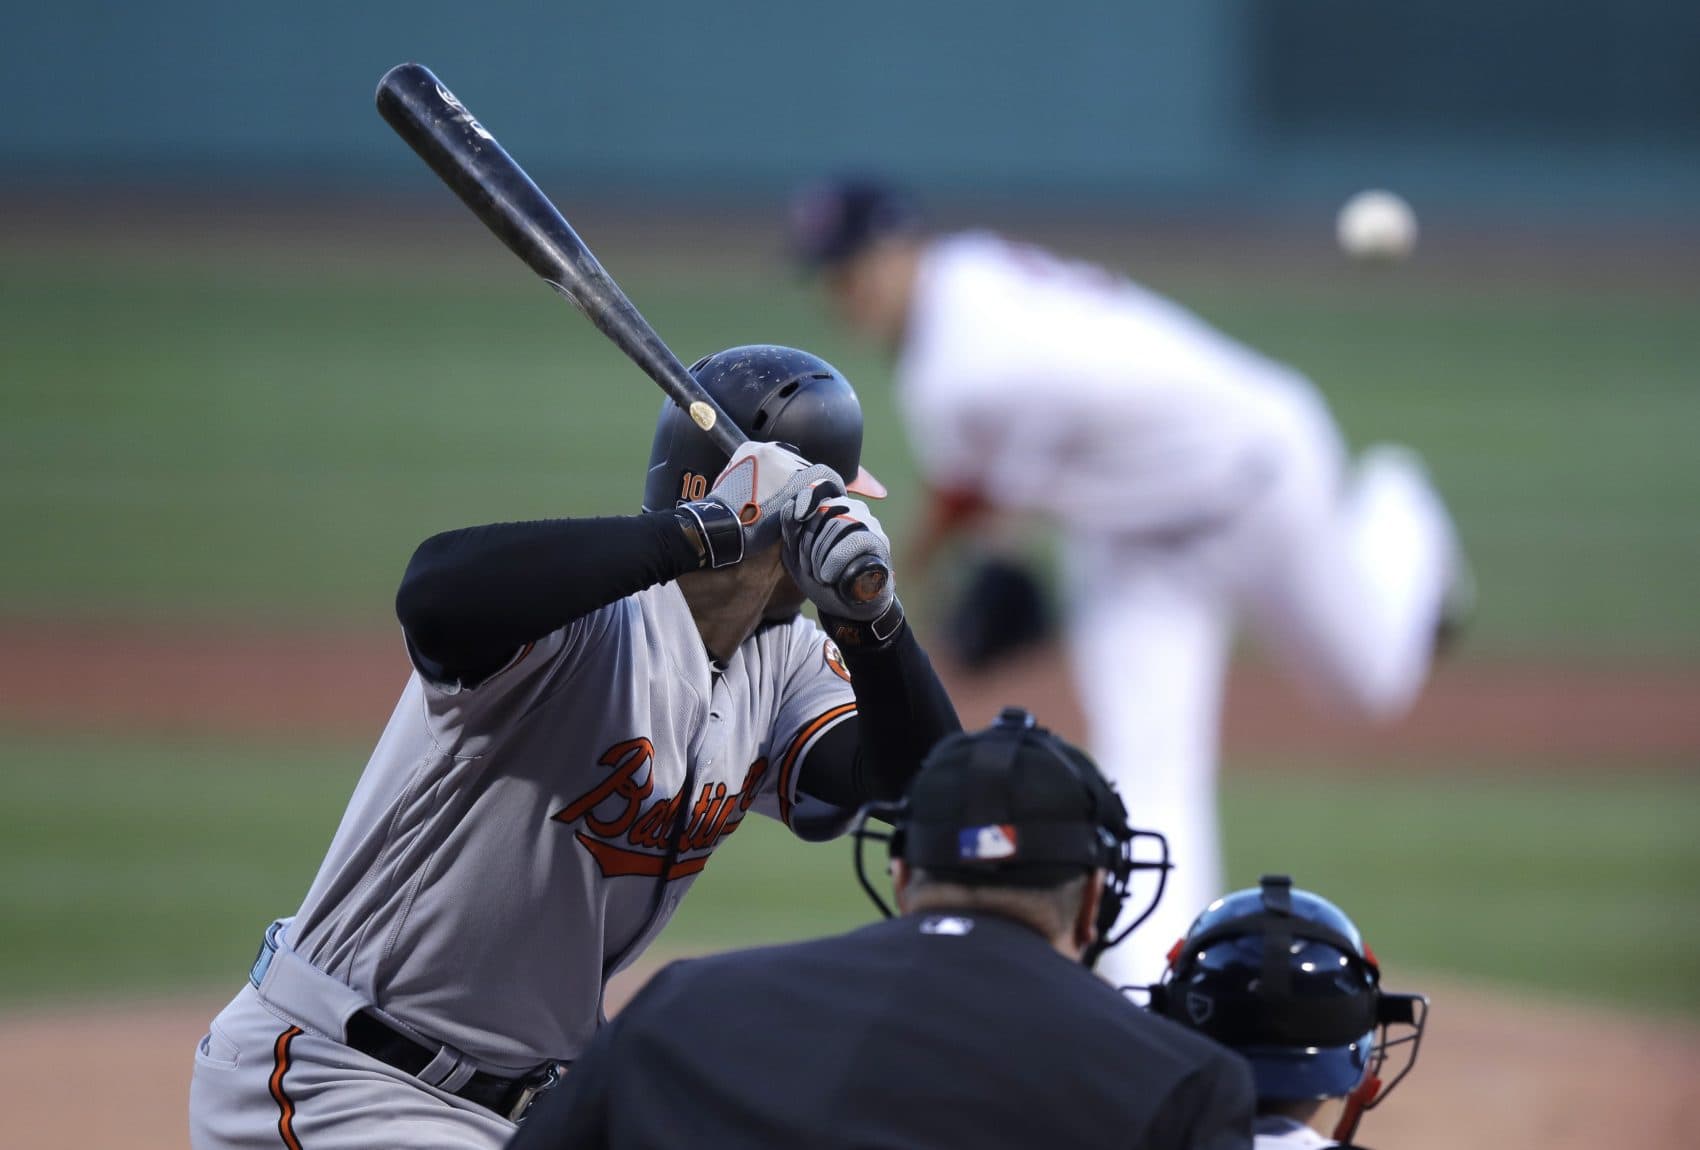 Clinton blamed Comey, Comey got nauseous, Red Sox fans got angry, and Trump fudged U.S. history. All that and more from Tom Keane's roundup of the week in the news. Pictured: Baltimore Orioles' Adam Jones during a game at Fenway Park in Boston, Wednesday, May 3, 2017. (Charles Krupa/AP)